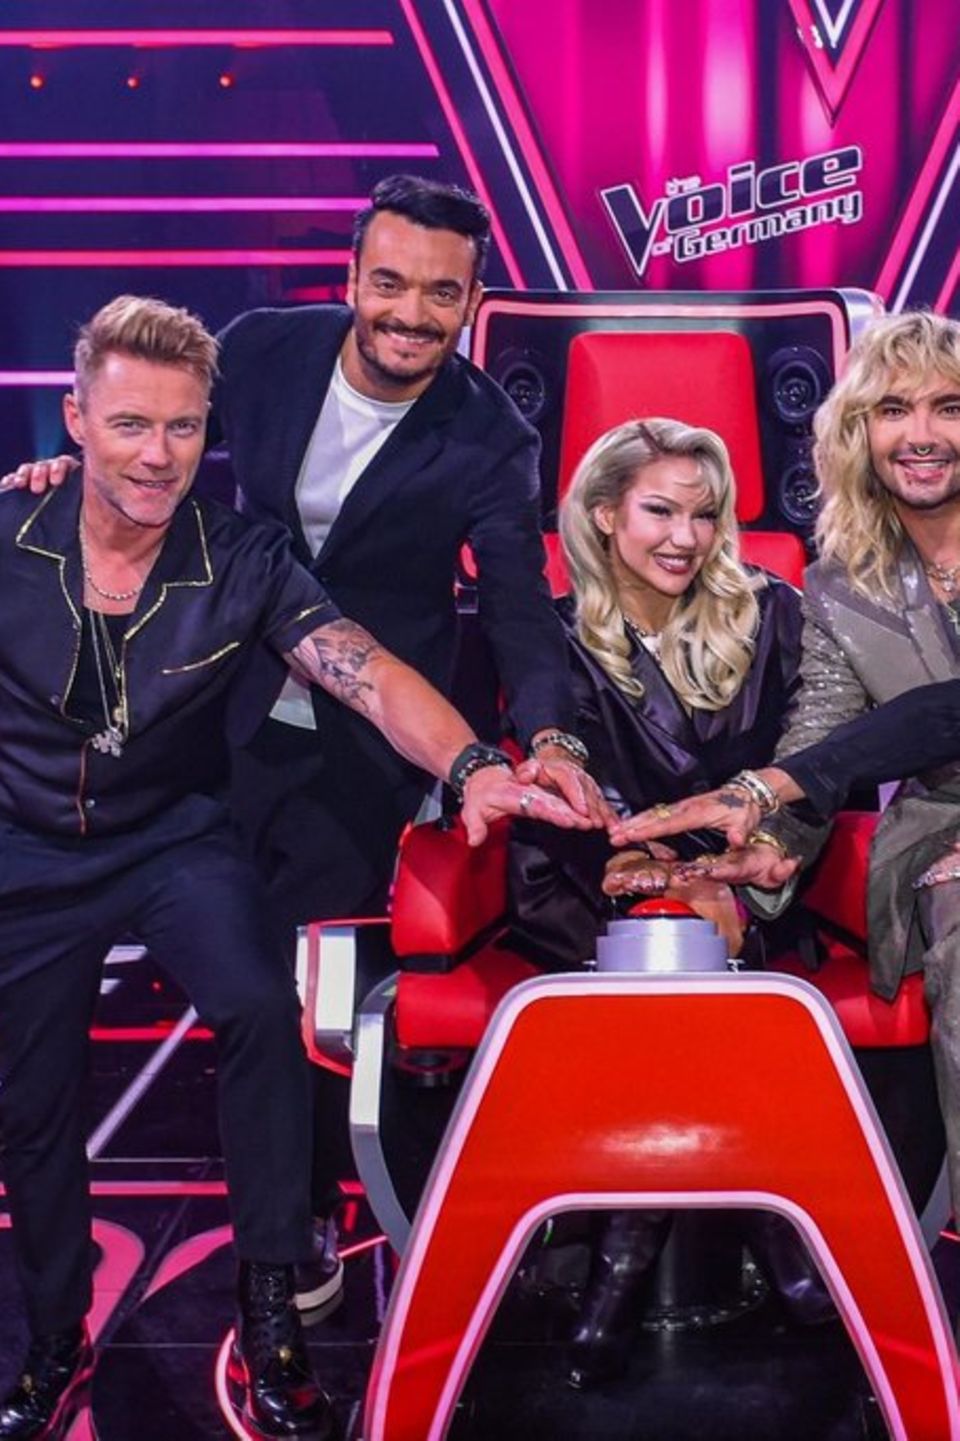 Großer Umbruch bei "The Voice of Germany".